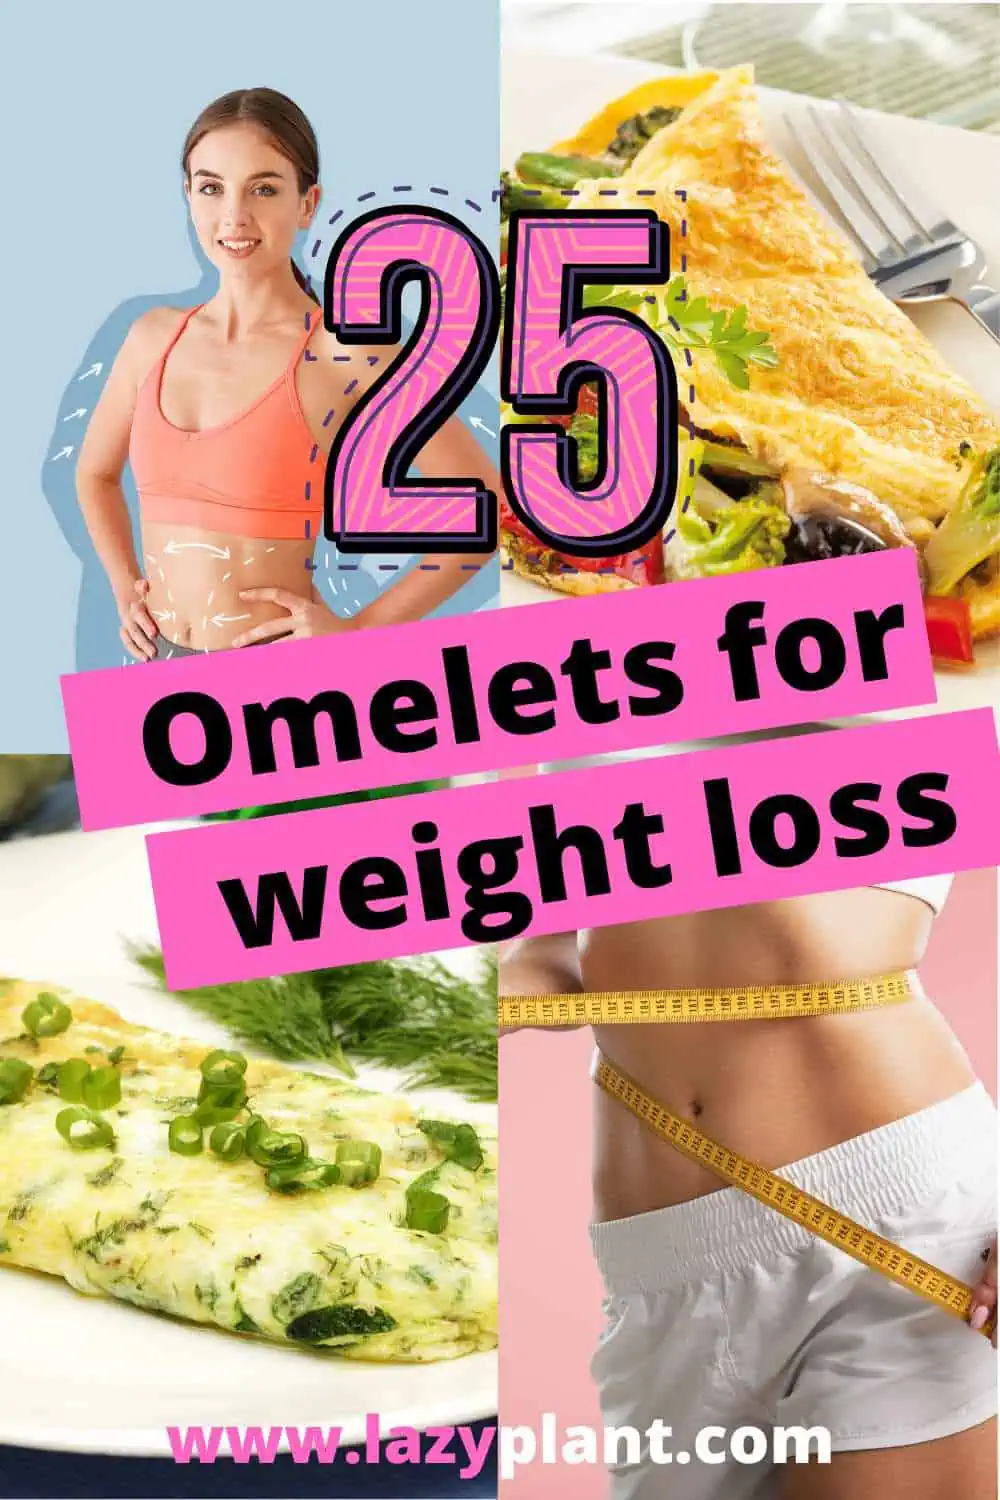 How to prepare the best oats egg omelet for weight loss?